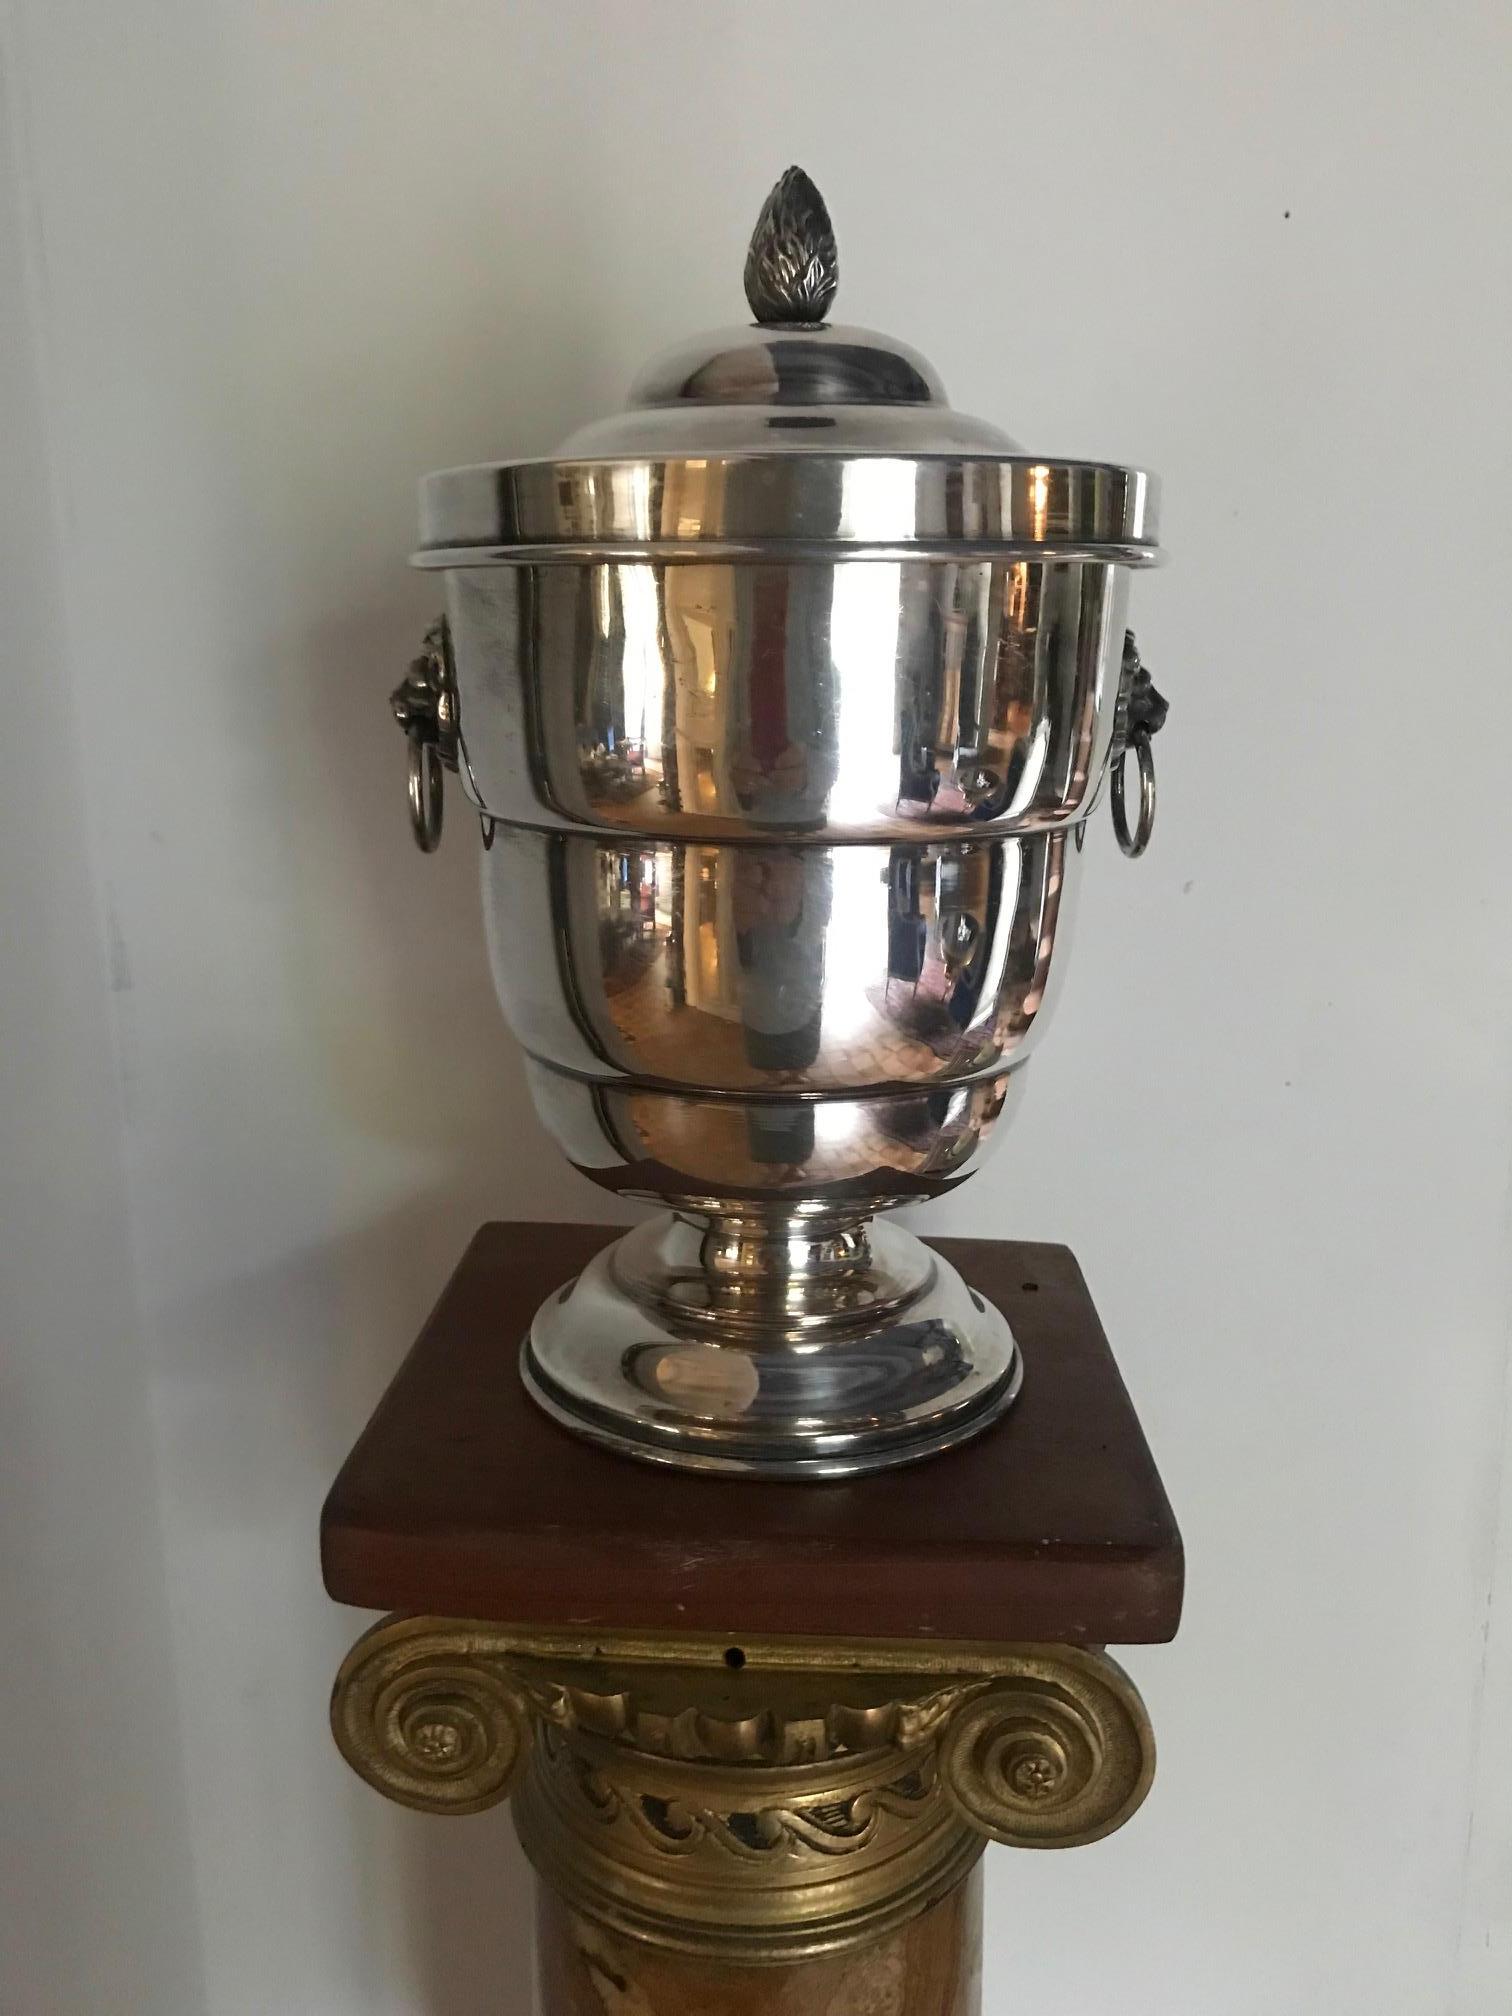 A fantastic quality silver plate English ice bucket. Georgian style with lion head handles and mercury glass lined bucket. The lid is adorned with an acorn. Stamped underneath silver plate.